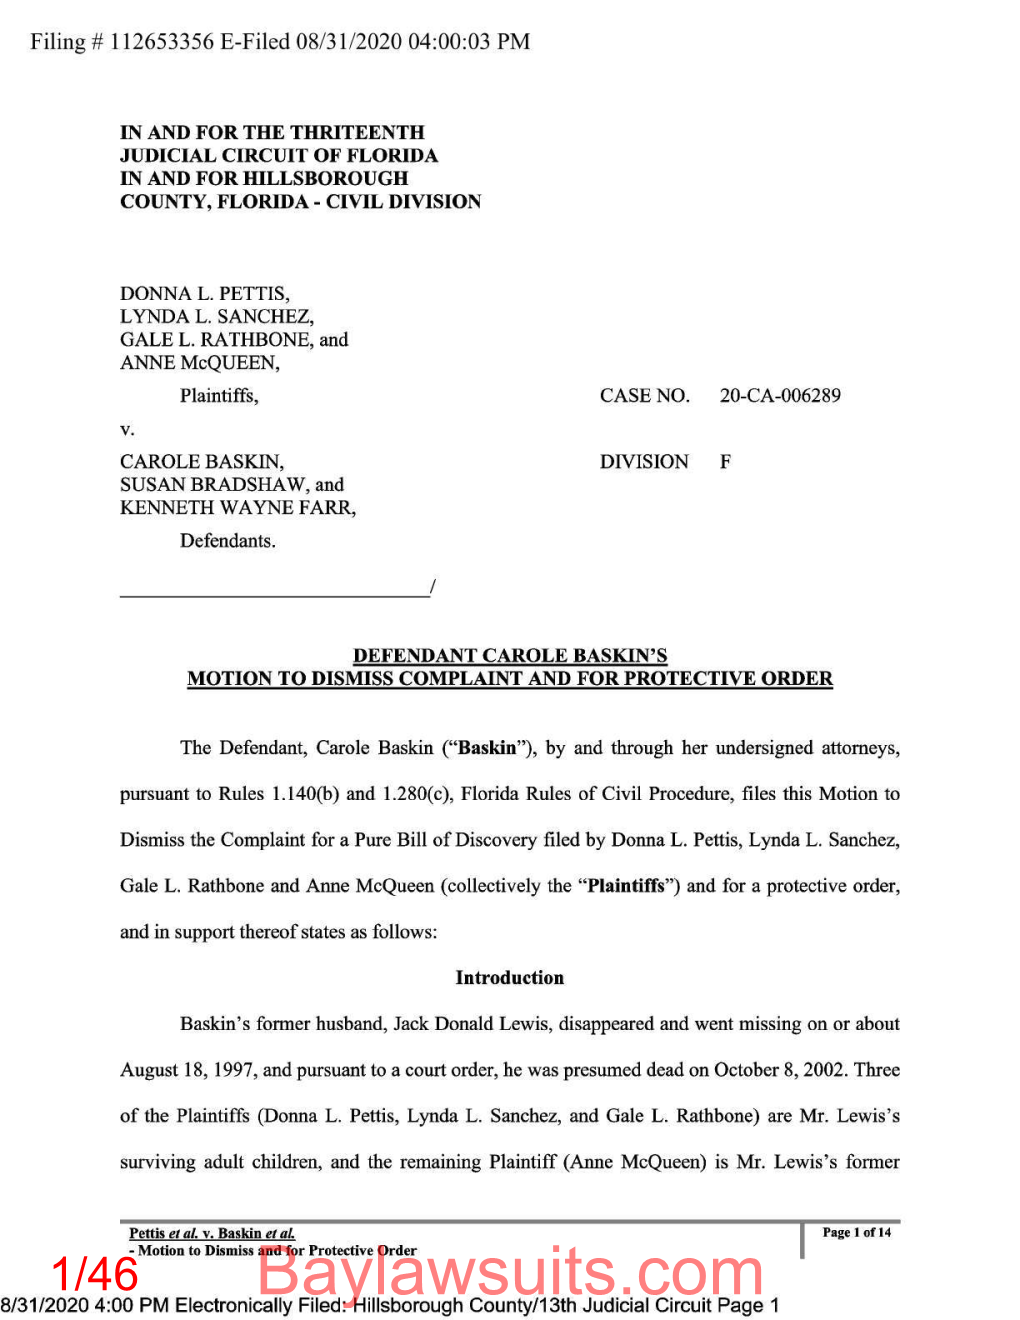 Motion to Dismiss Complaint and for Protective Order